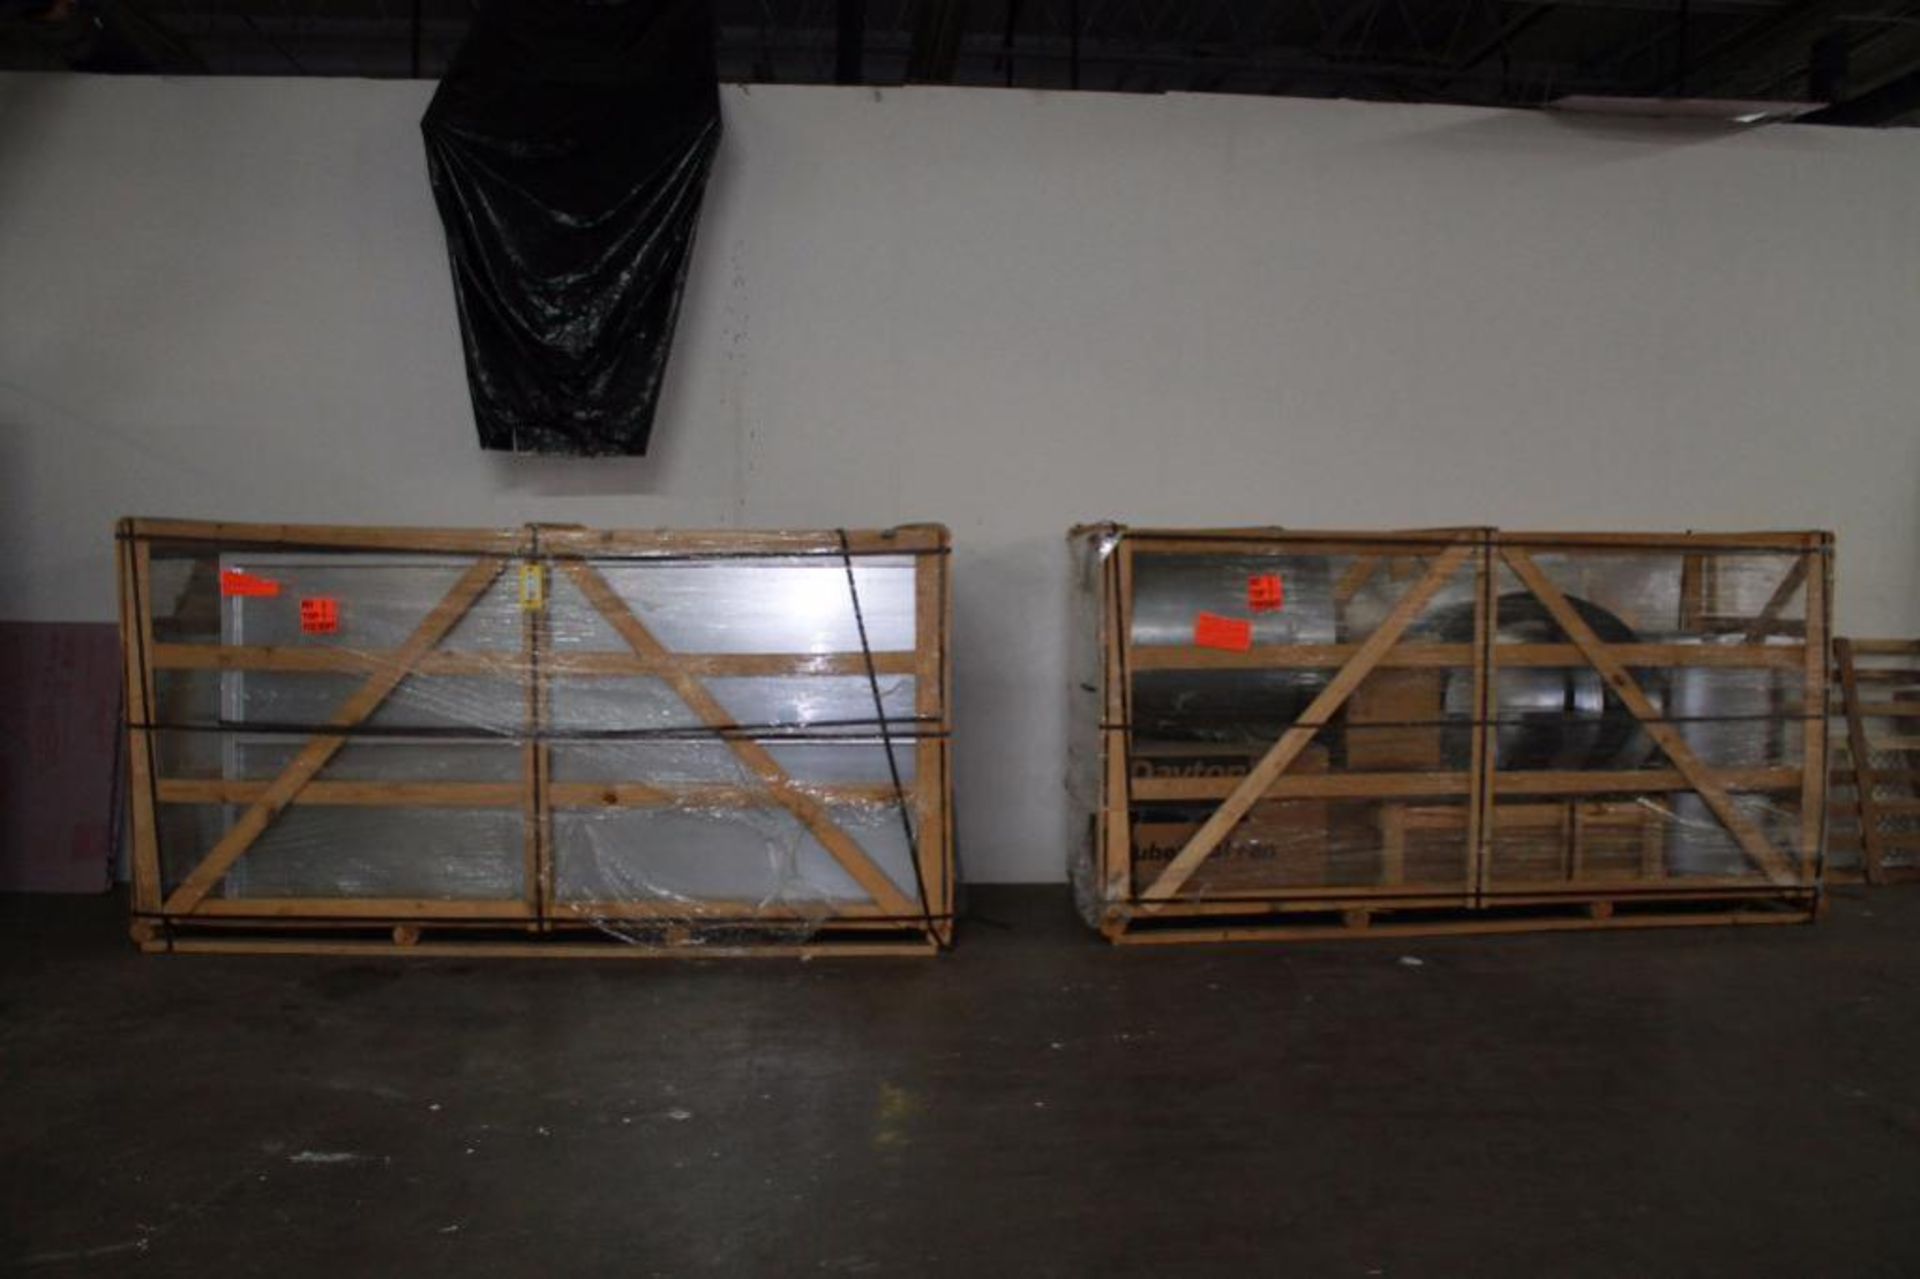 Unassembled Spray Paint Booth in (2) Shipping Crates